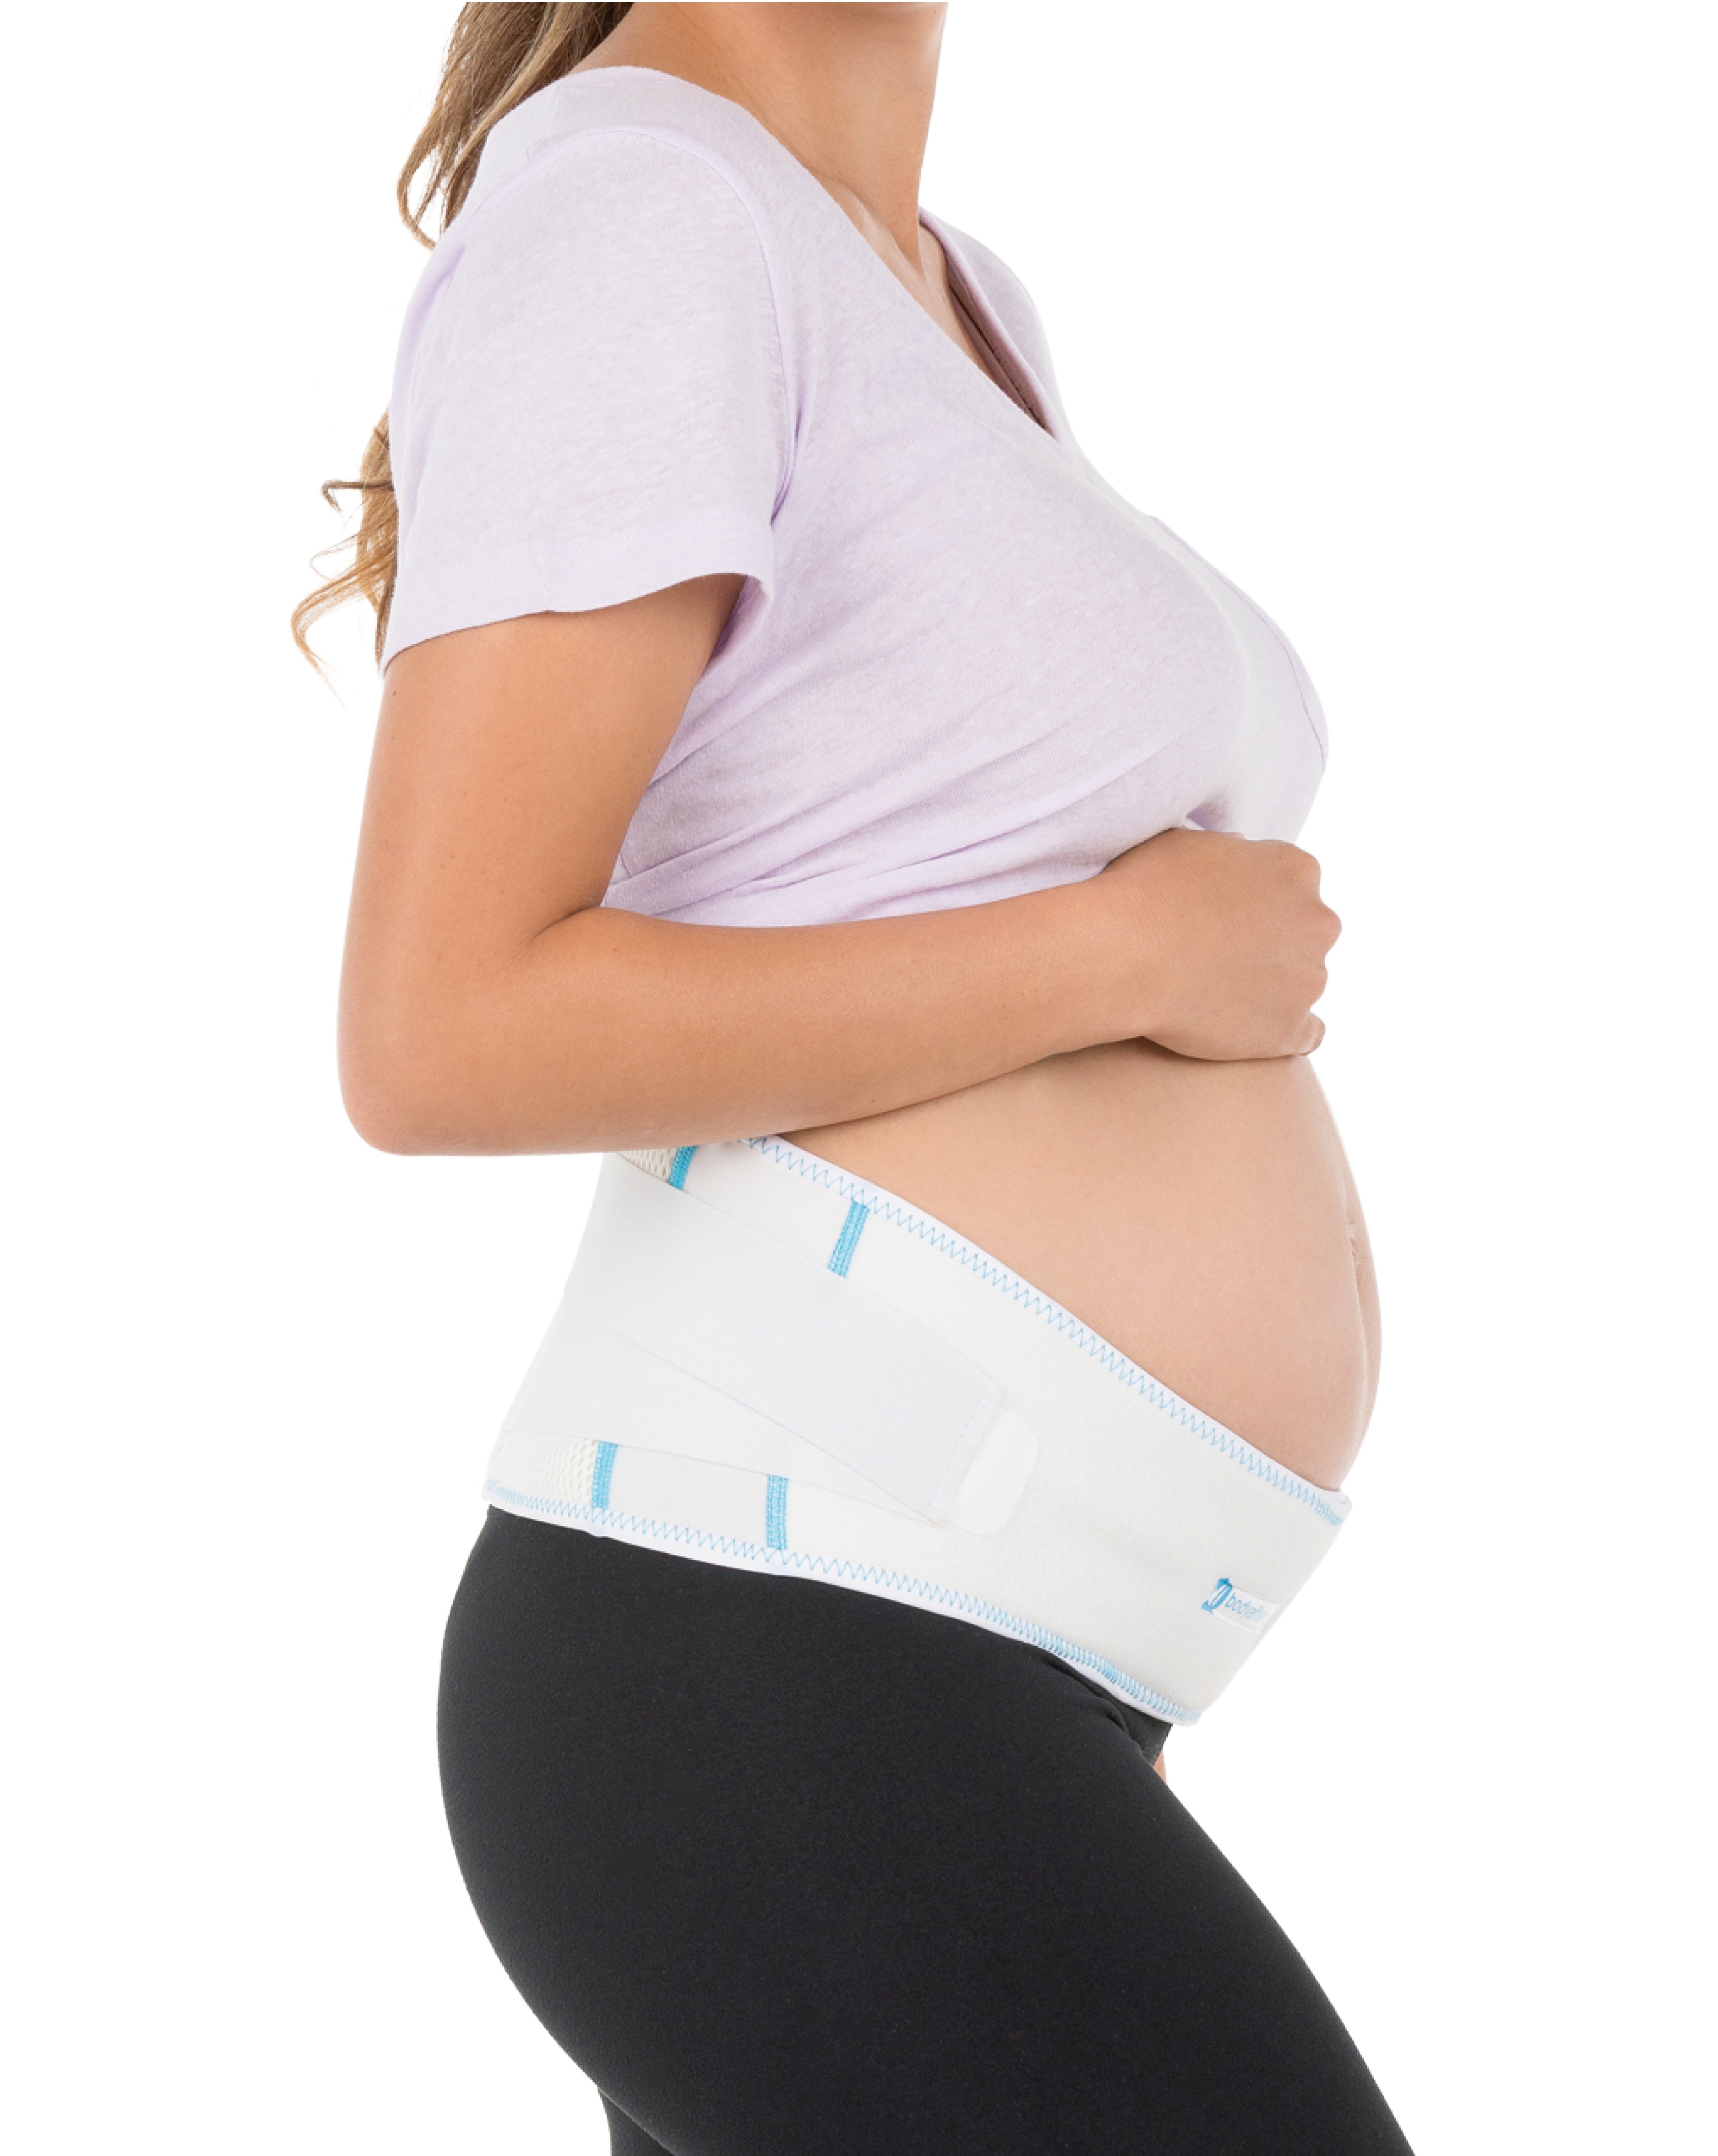 Breathable Maternity Stomach Lift Belt/Abdominal Binder - Black, Shop  Today. Get it Tomorrow!